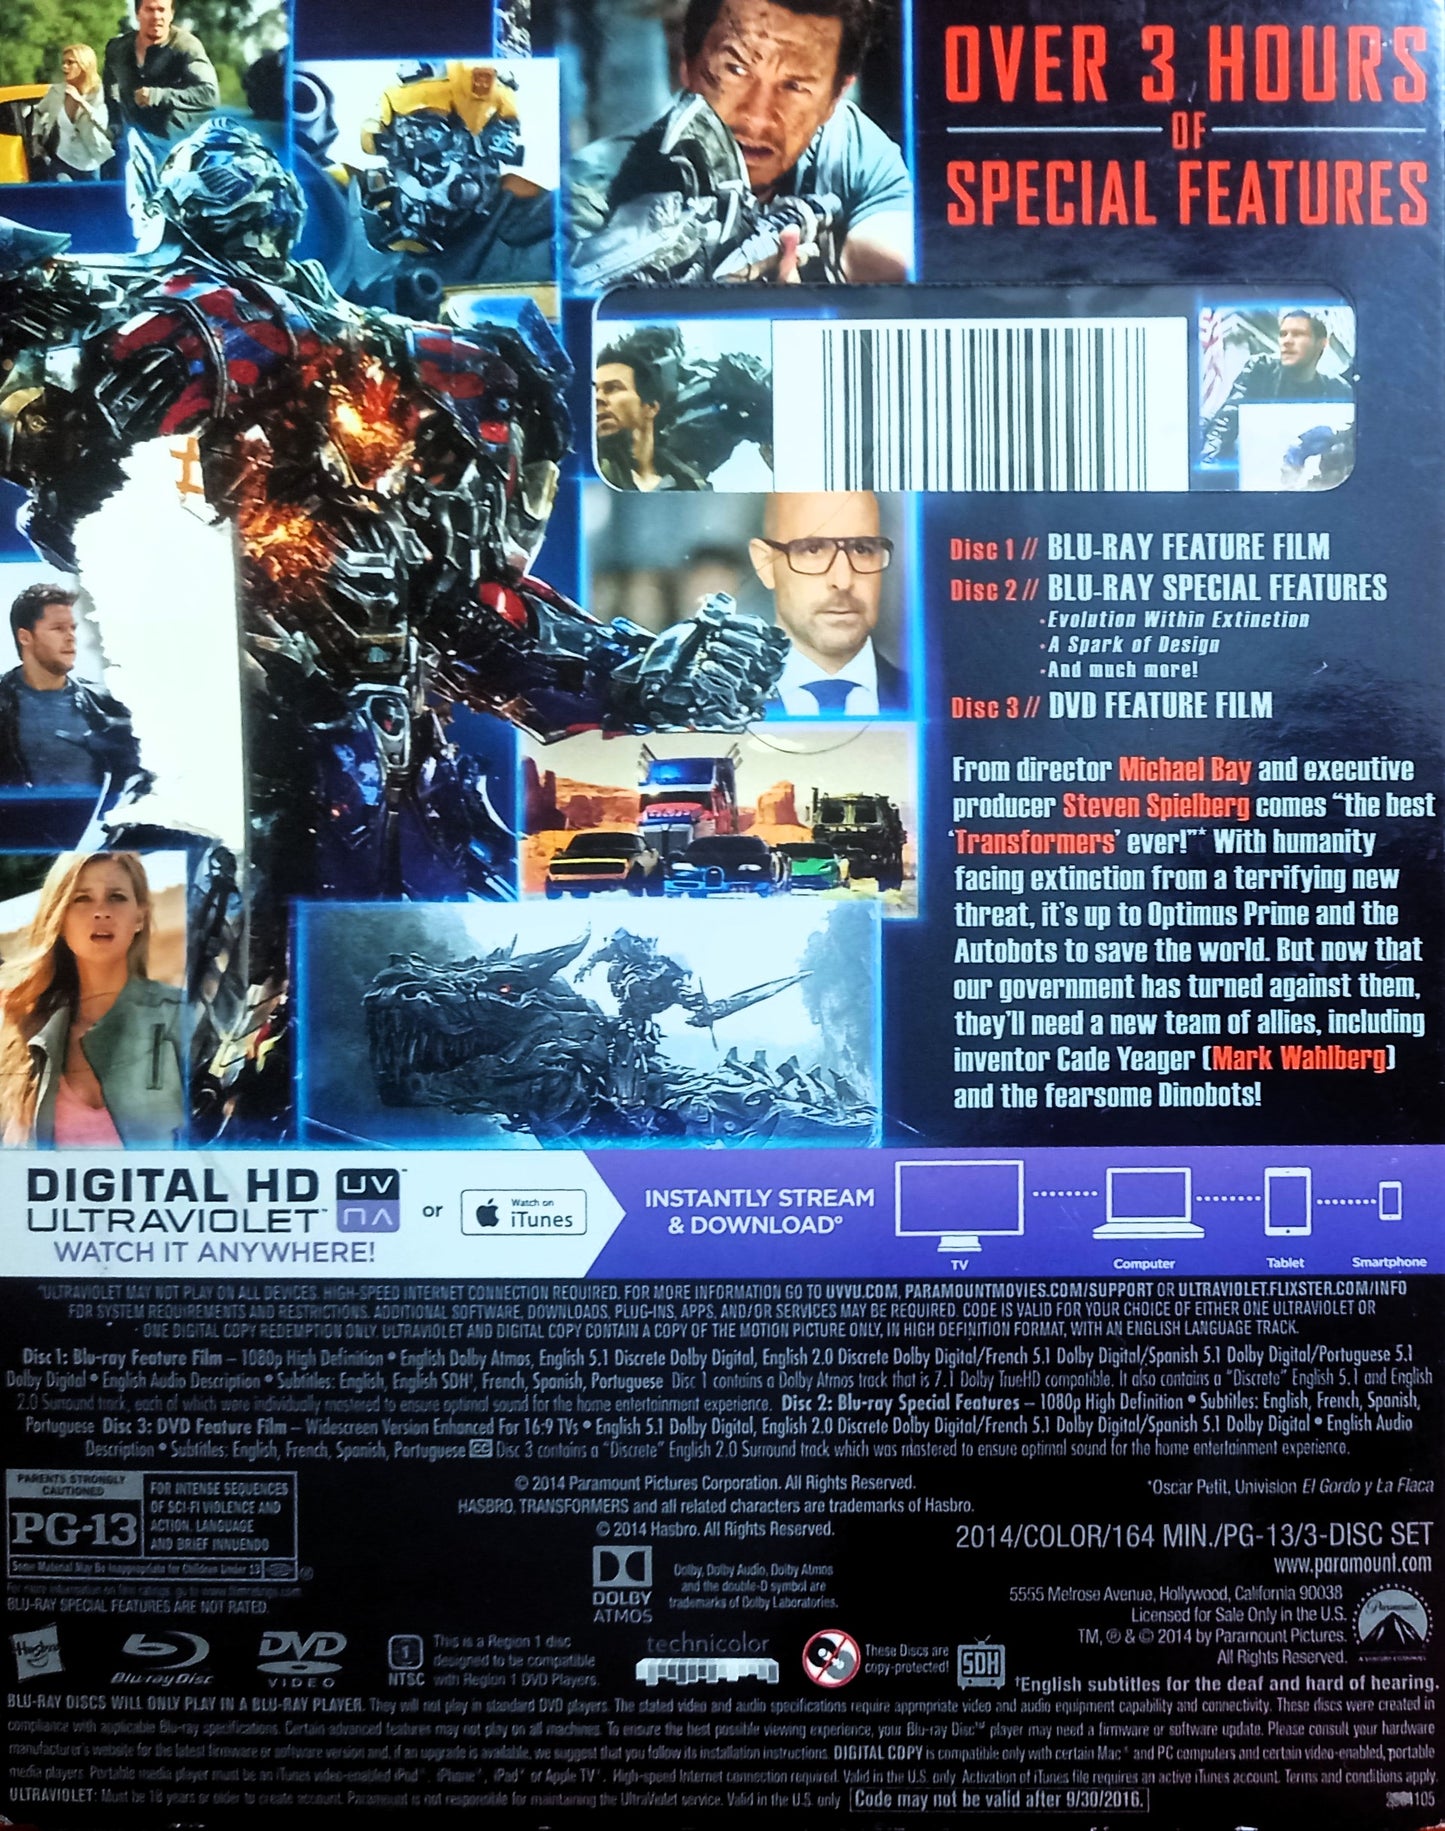 Transformers: Age of Extinction (Blu-ray Combo Pack)